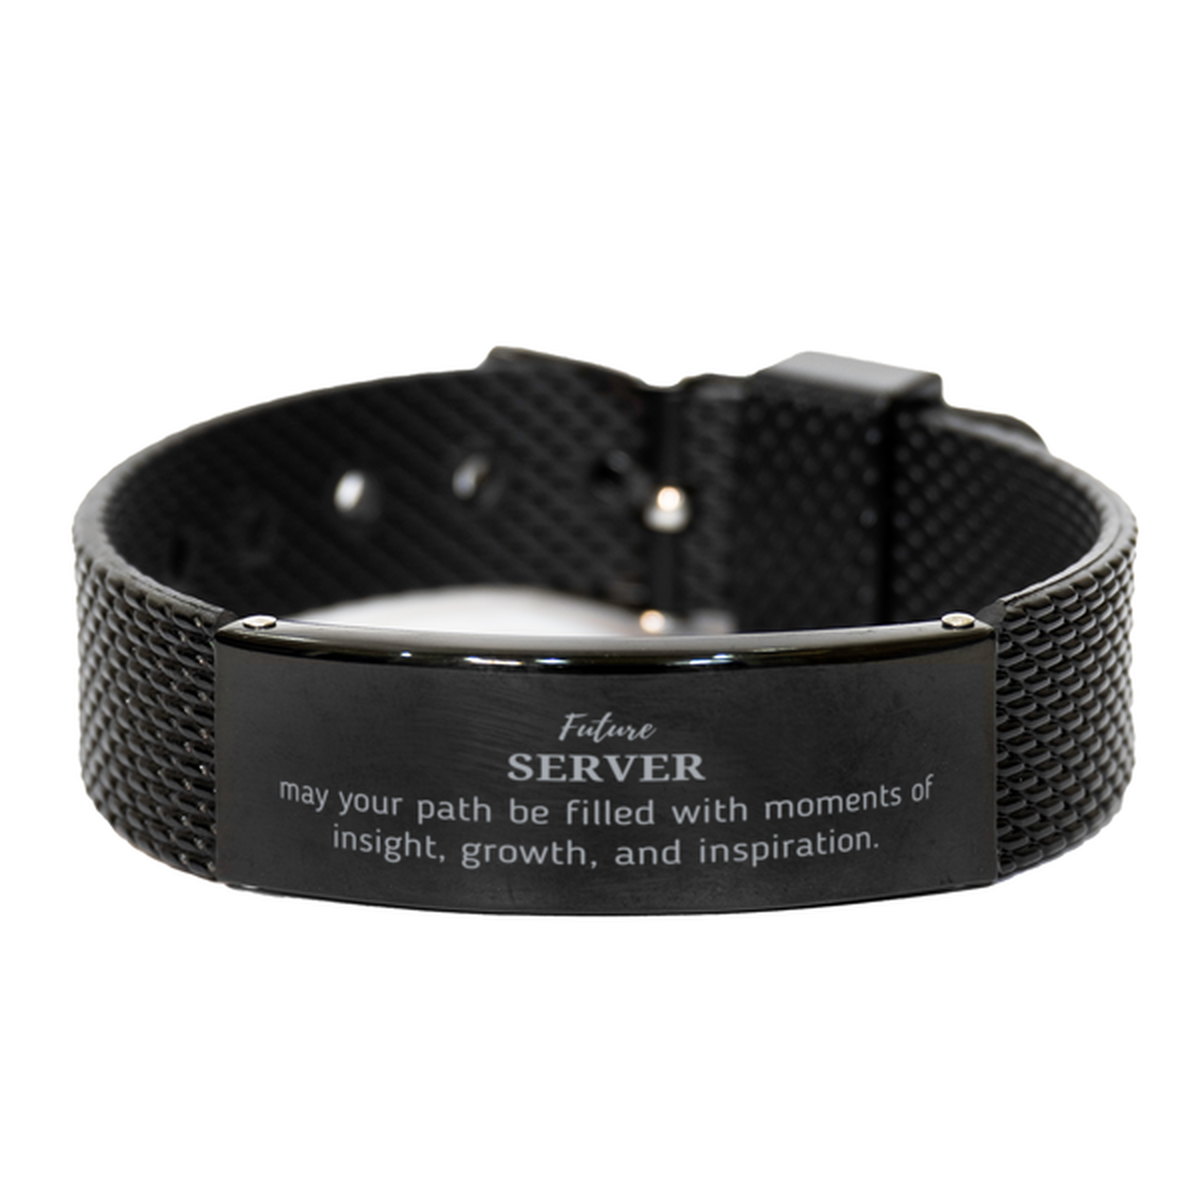 Future Server Gifts, May your path be filled with moments of insight, Graduation Gifts for New Server, Christmas Unique Black Shark Mesh Bracelet For Men, Women, Friends